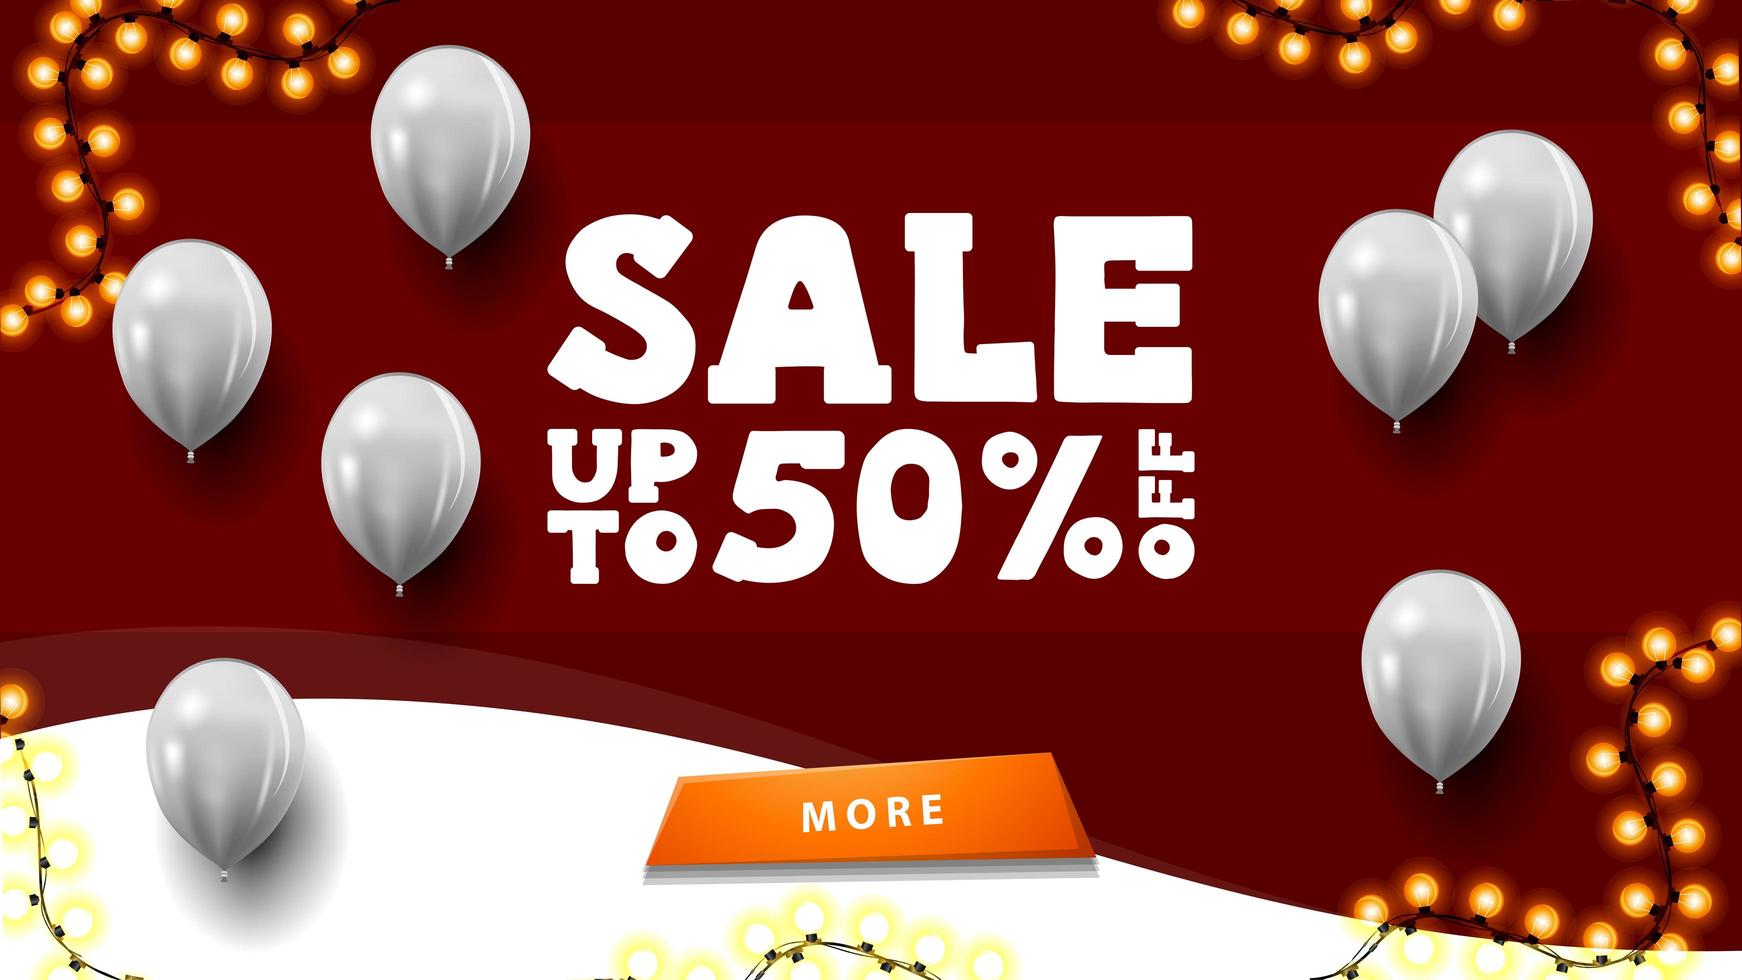 Sale, up to 50 off, red banner with white balloons vector